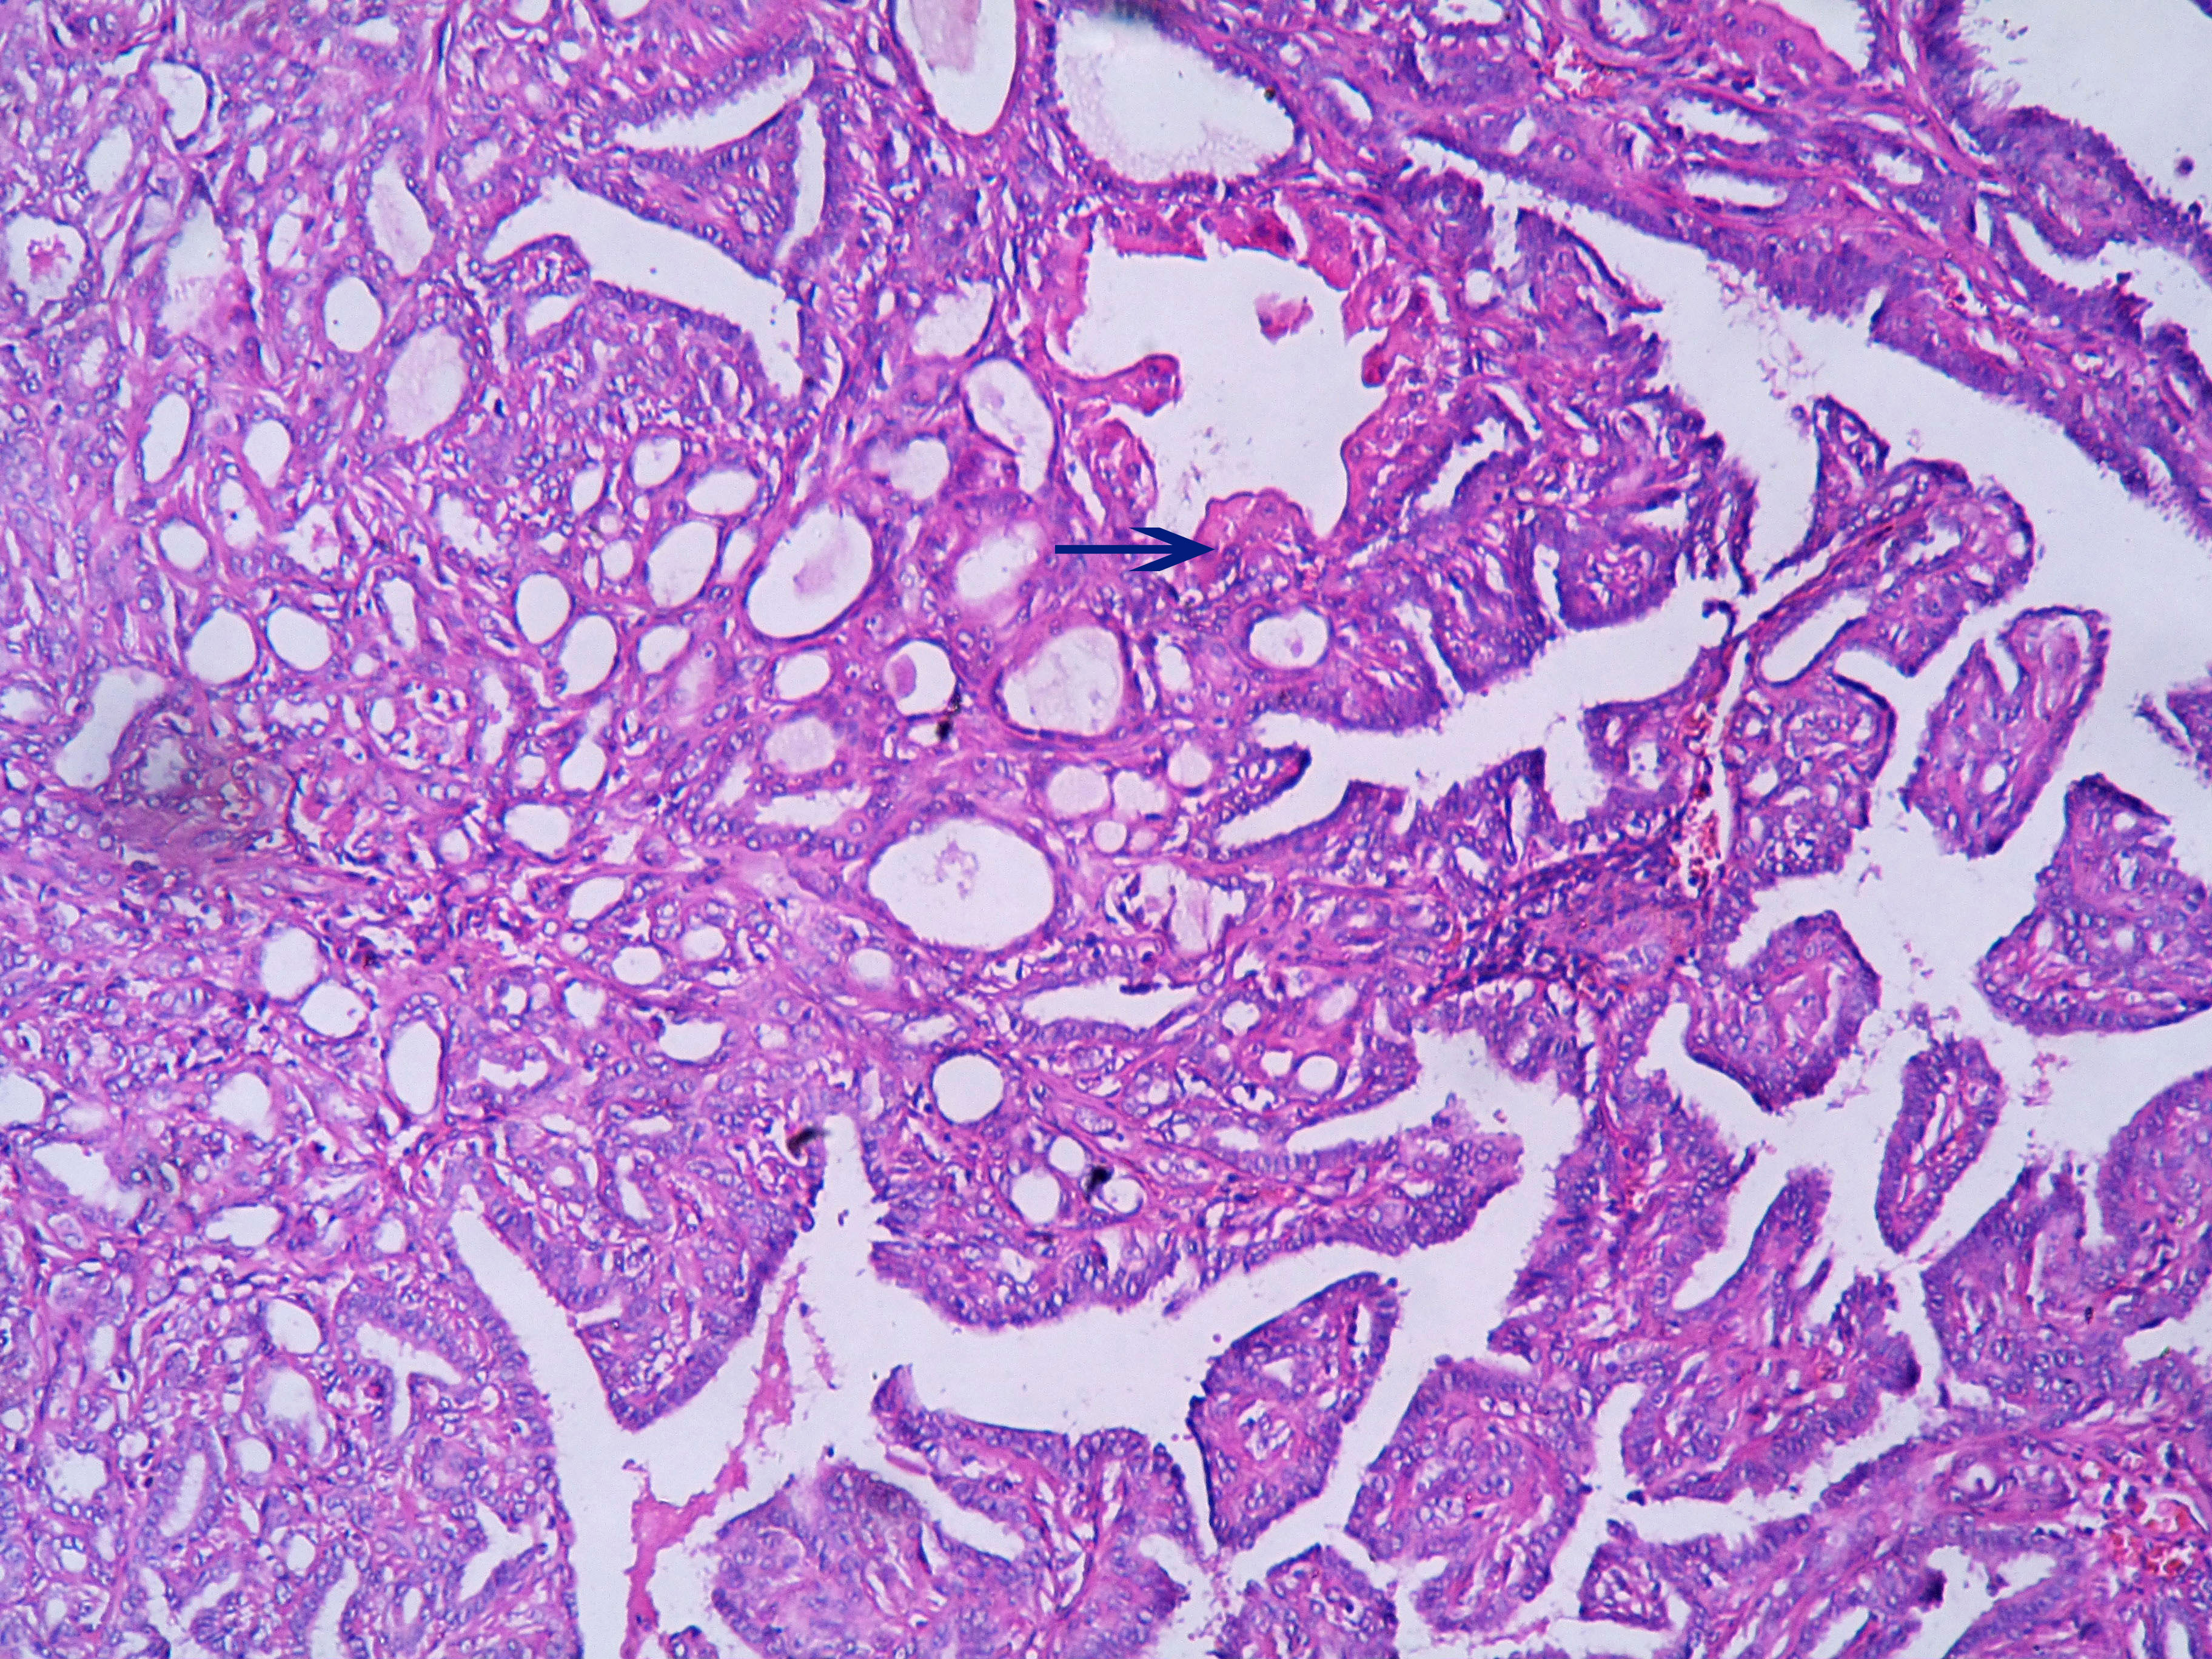 intraductal papilloma with epithelial hyperplasia